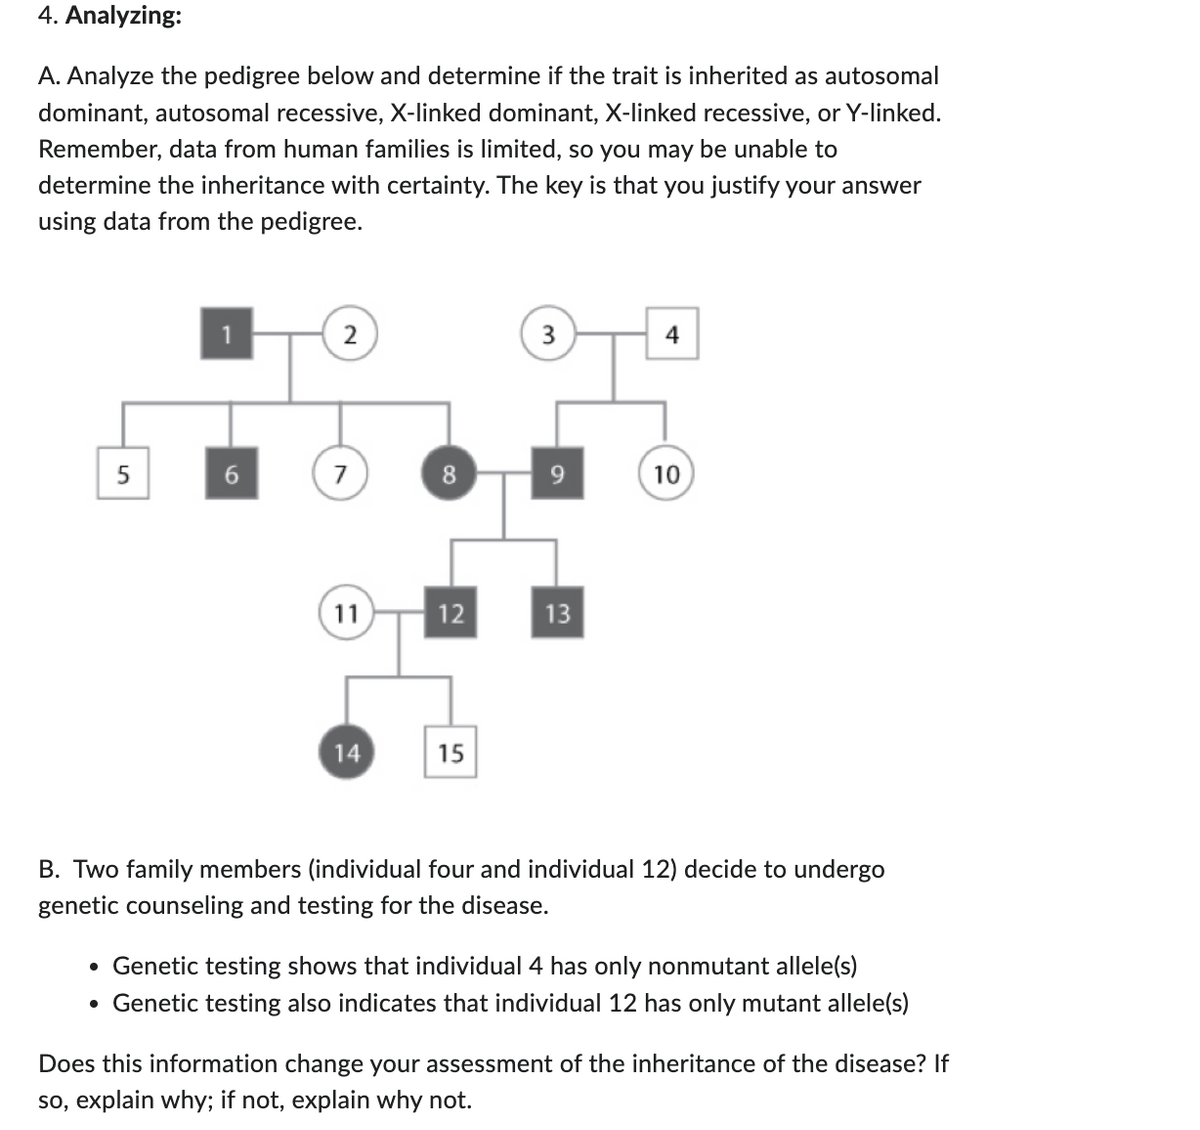 4. Analyzing:
A. Analyze the pedigree below and determine if the trait is inherited as autosomal
dominant, autosomal recessive, X-linked dominant, X-linked recessive, or Y-linked.
Remember, data from human families is limited, so you may be unable to
determine the inheritance with certainty. The key is that you justify your answer
using data from the pedigree.
5
2
7
11
14
8
12
15
3
13
4
10
B. Two family members (individual four and individual 12) decide to undergo
genetic counseling and testing for the disease.
• Genetic testing shows that individual 4 has only nonmutant allele(s)
• Genetic testing also indicates that individual 12 has only mutant allele(s)
Does this information change your assessment of the inheritance of the disease? If
so, explain why; if not, explain why not.